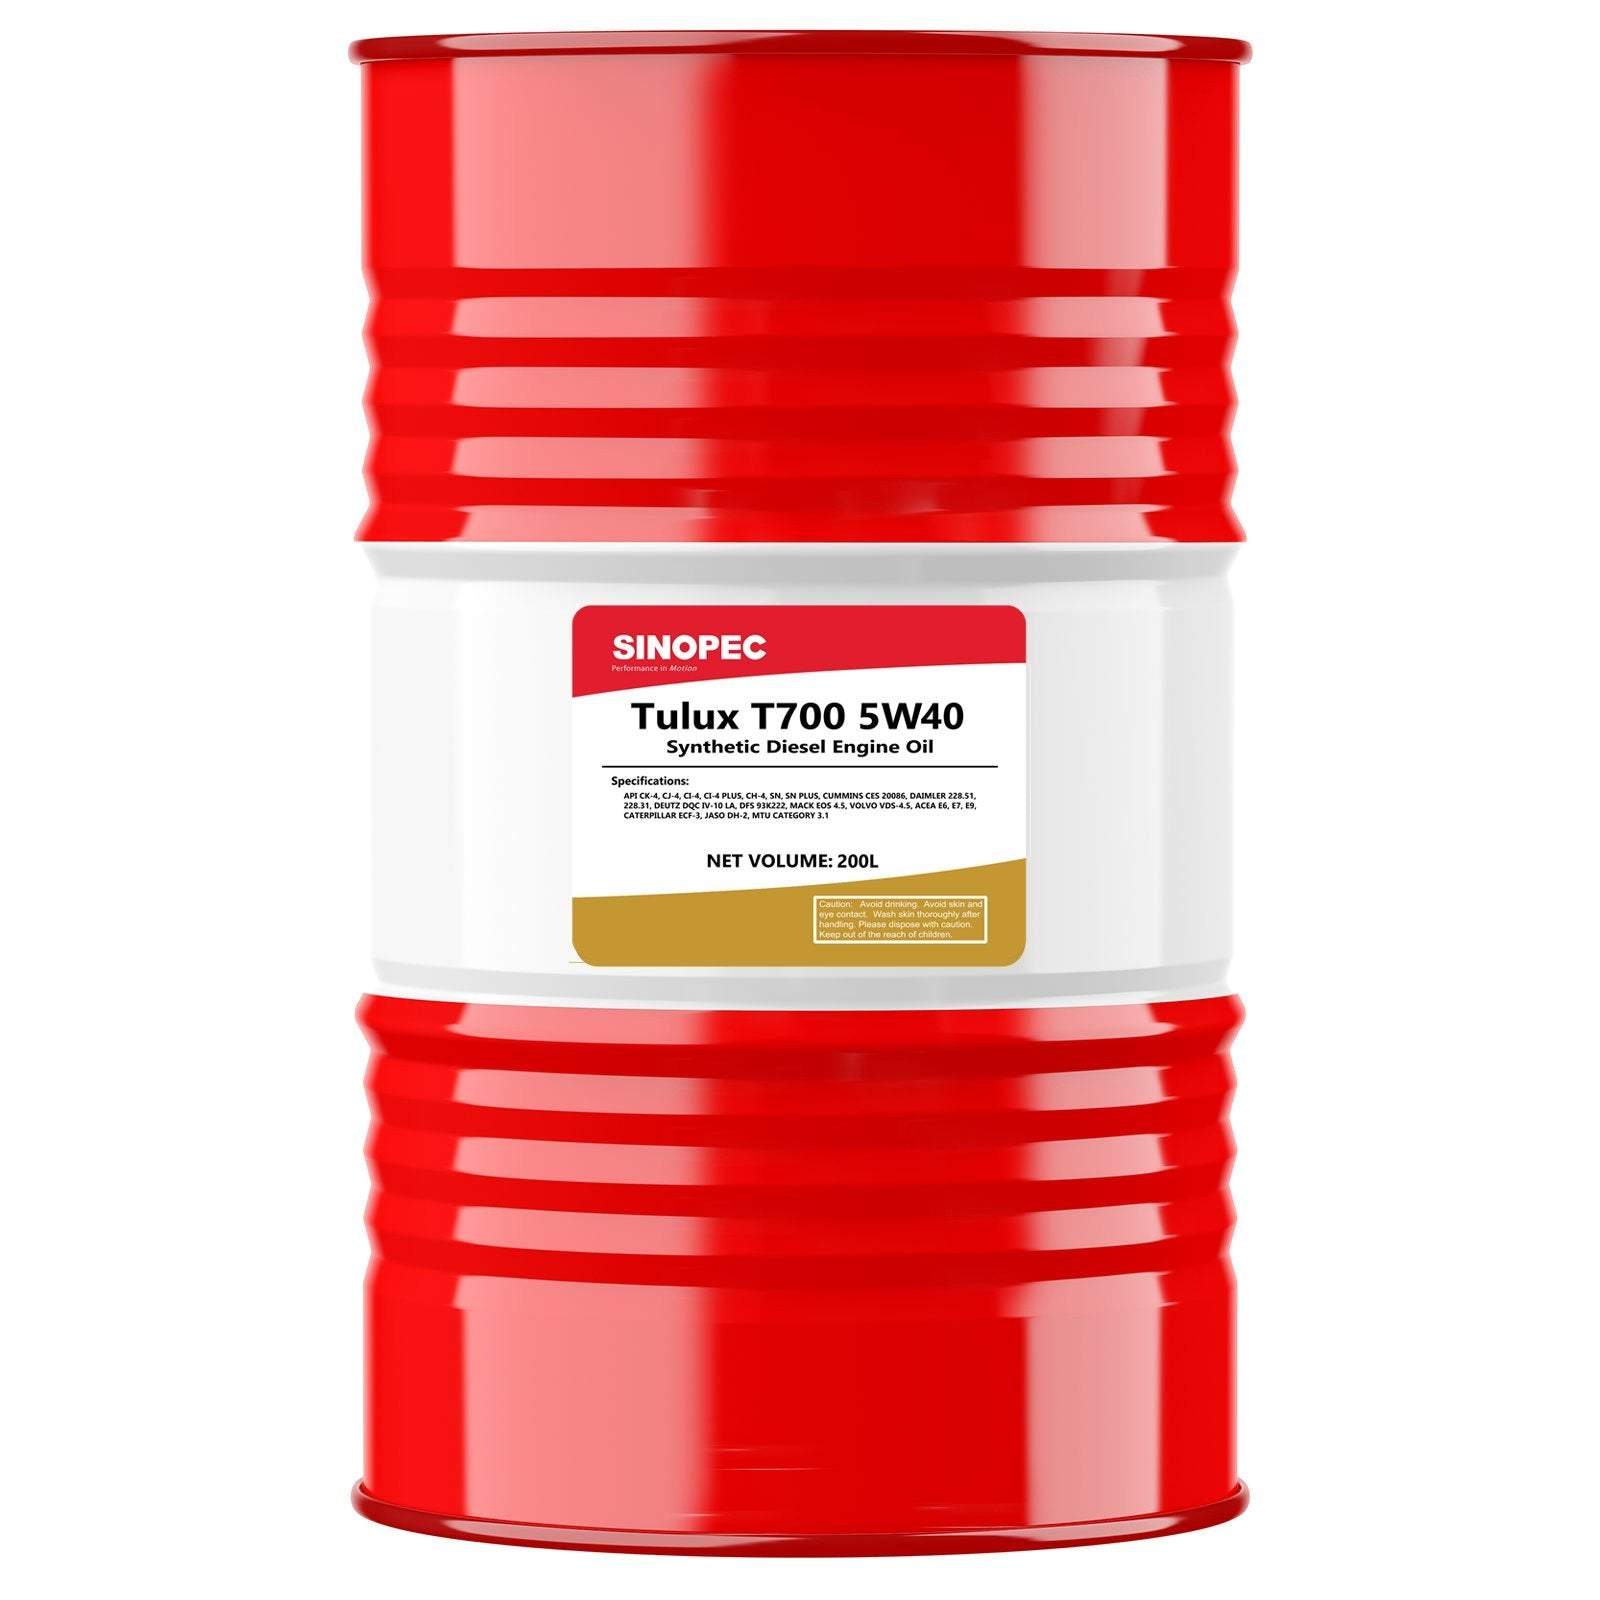 5W40 CK-4 Synthetic Diesel Engine Oil - 55 Gallon Drum